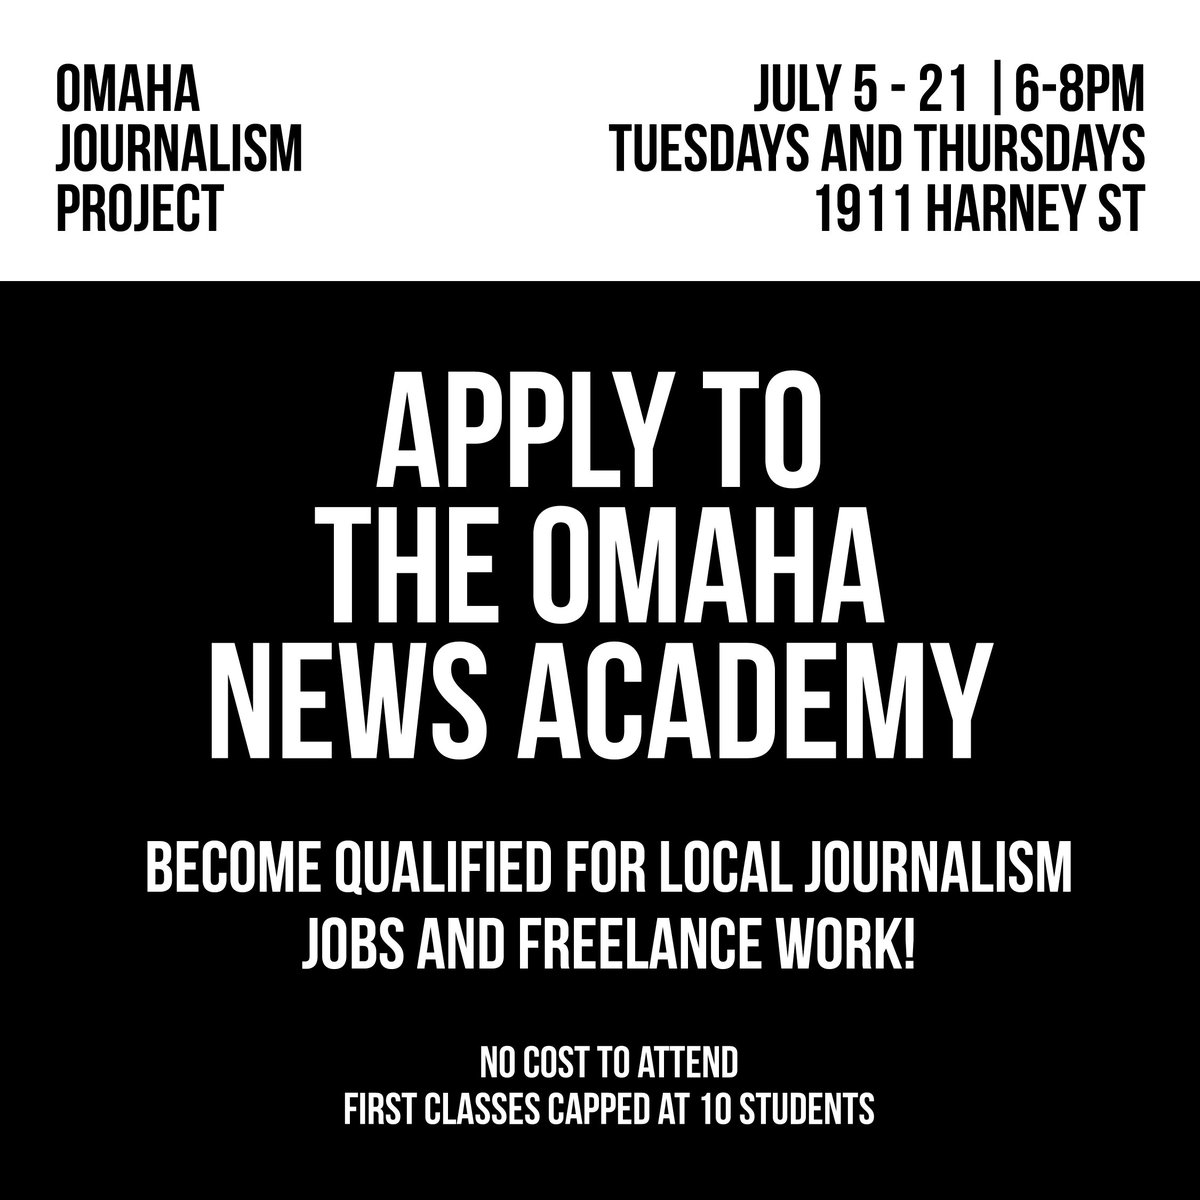 This summer, @noiseomaha and @flatwaterfreep are launching a course covering the basics of journalism.The first class is capped at ten students. While there is no cost to attend. Tuesday and Thursday evenings from 6-8 July 5 - 21. Apply here: tinyurl.com/2p9at4fa